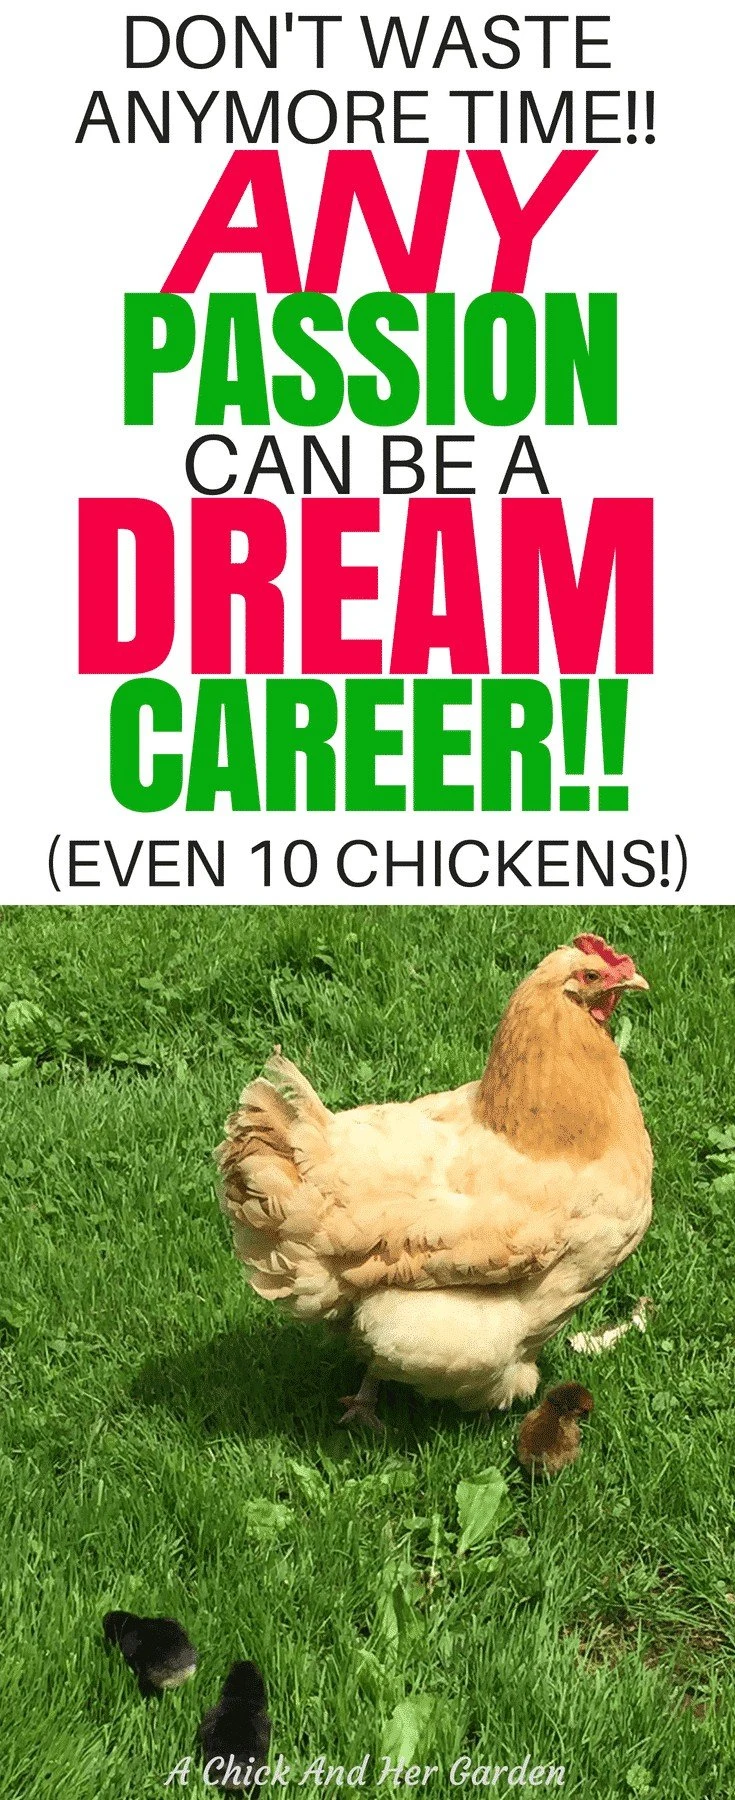  You can turn any passion into a career! Even 10 chickens! #lovewhatyoudo #dreamjob #workfromhome #makemoneyfromhome #makemoneyonline #achickandhergarden